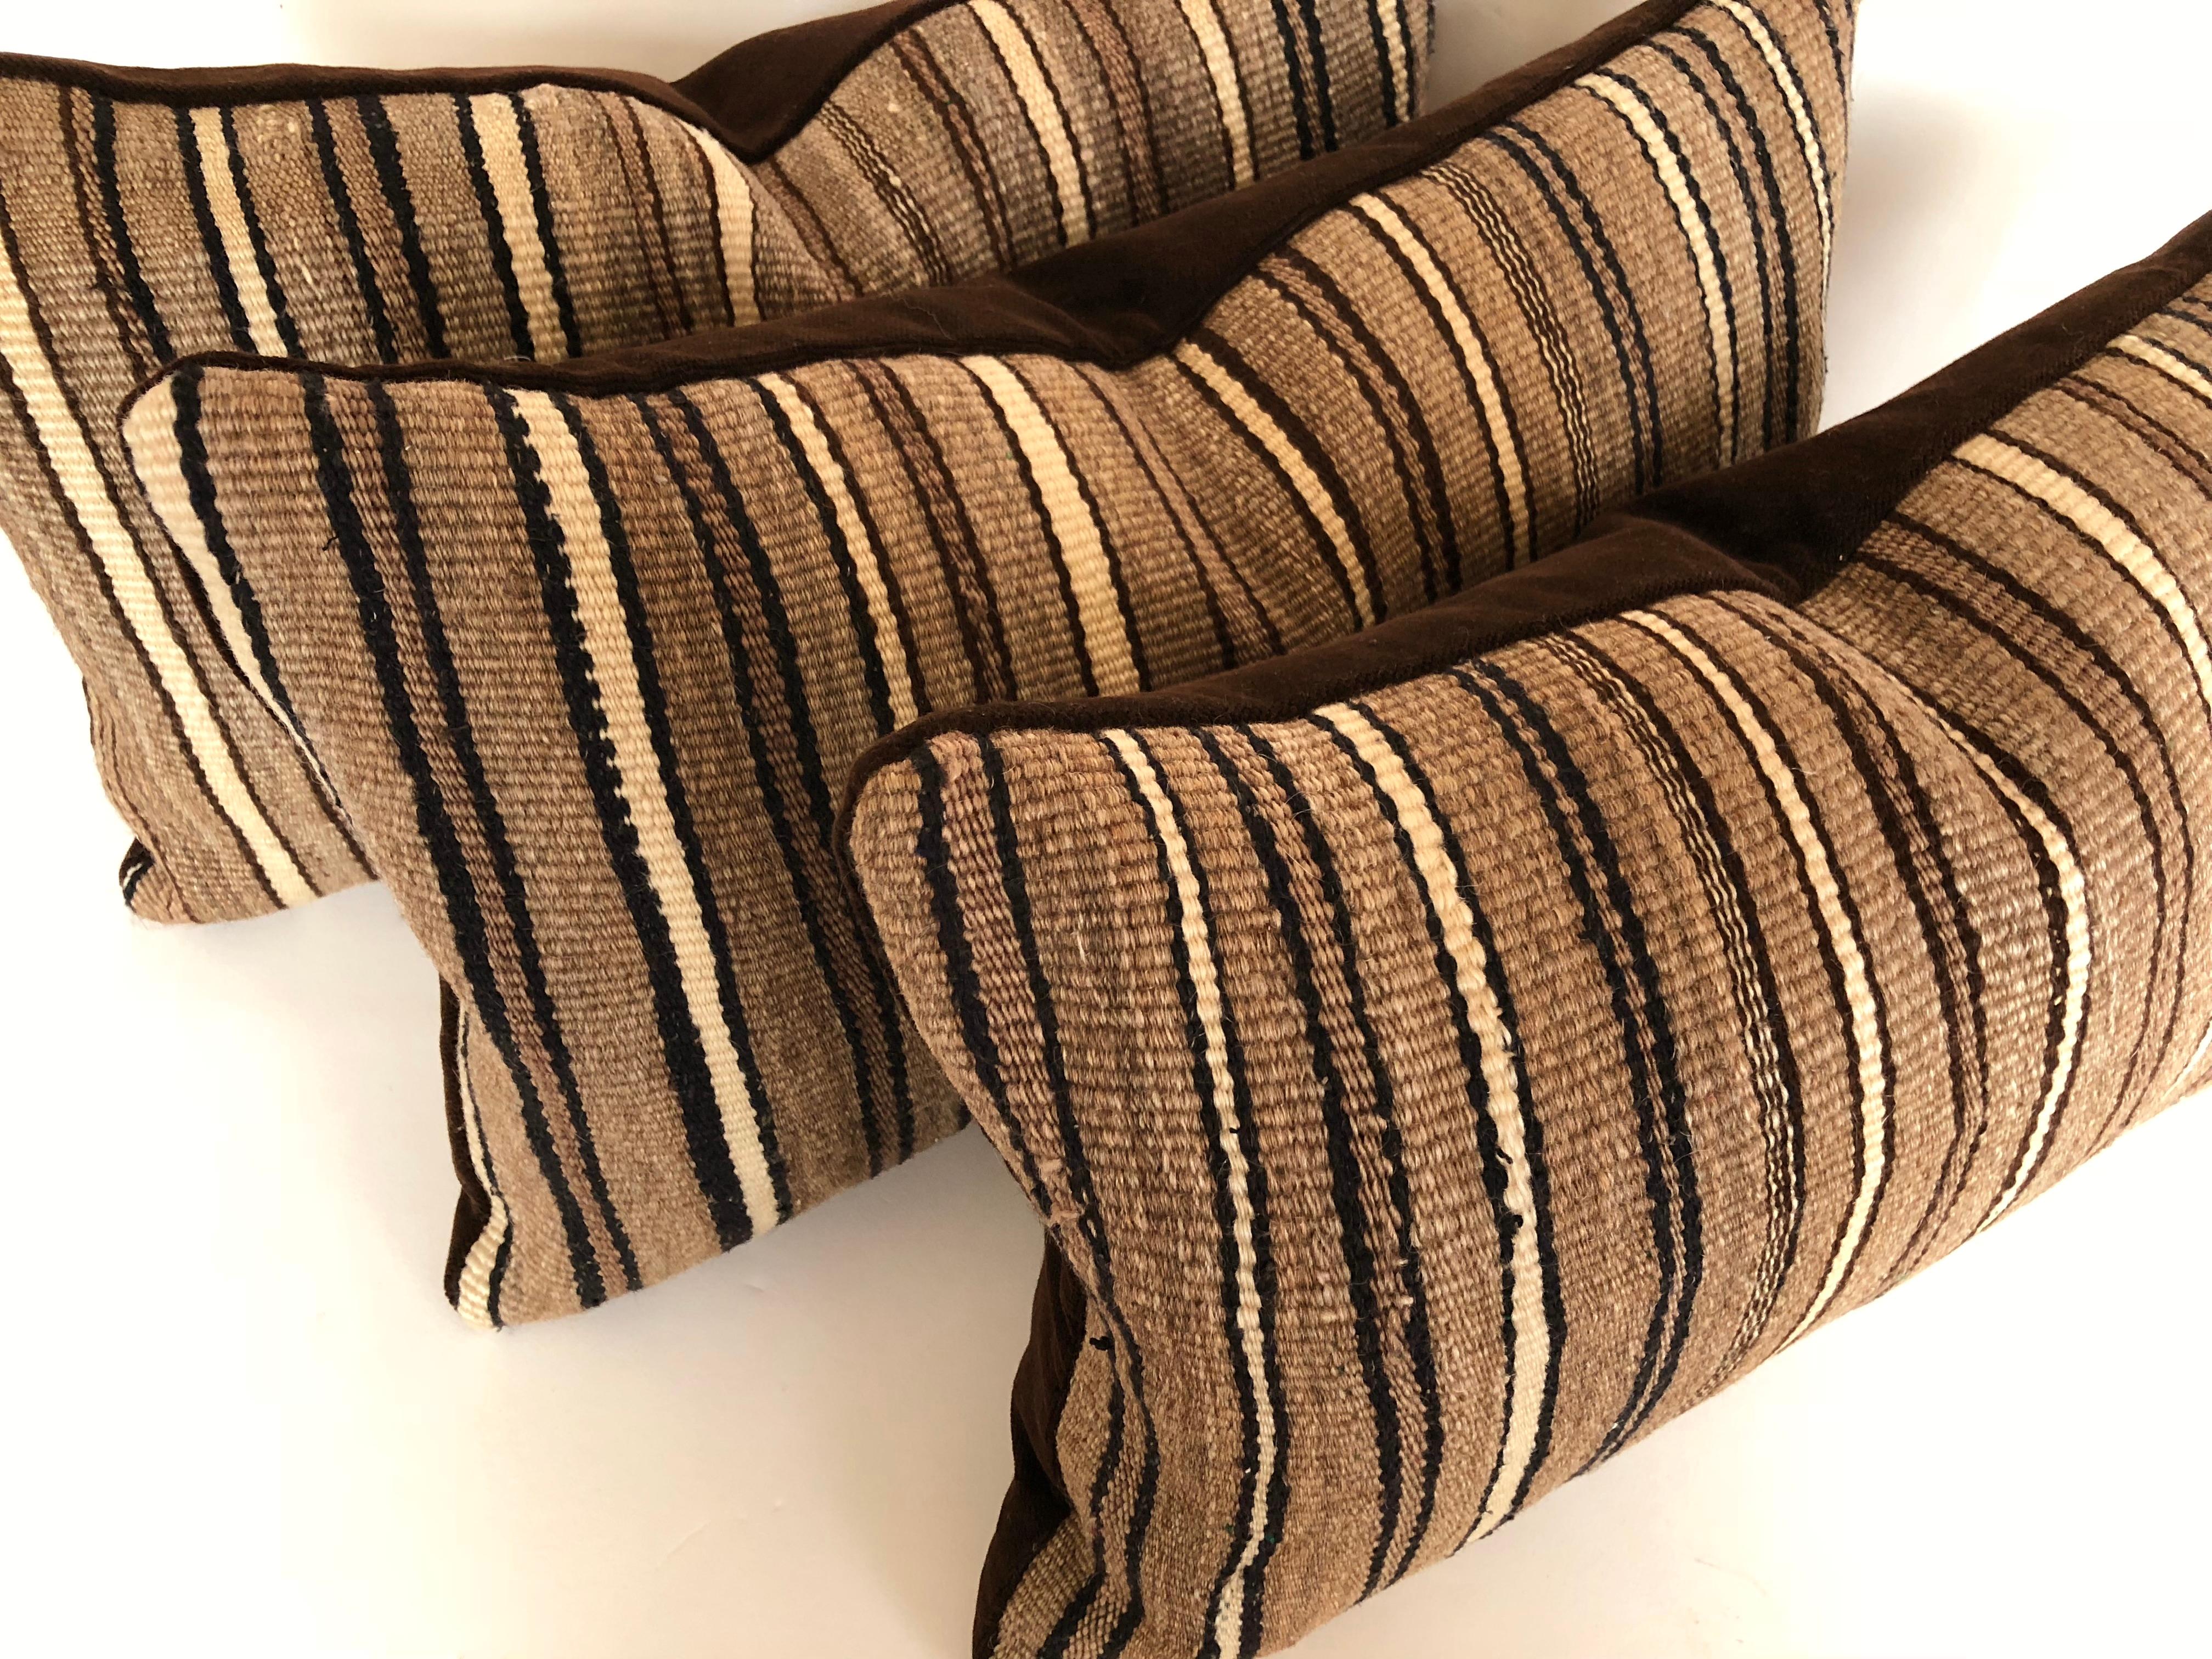 Custom pillows cut from a vintage hand loomed wool Moroccan Berber rug from the Atlas Mountains. Wool is soft and lustrous with arrow stripes in shades of brown with a touch of ivory and deep navy. Pillows are filled with an insert of 50/50 down and